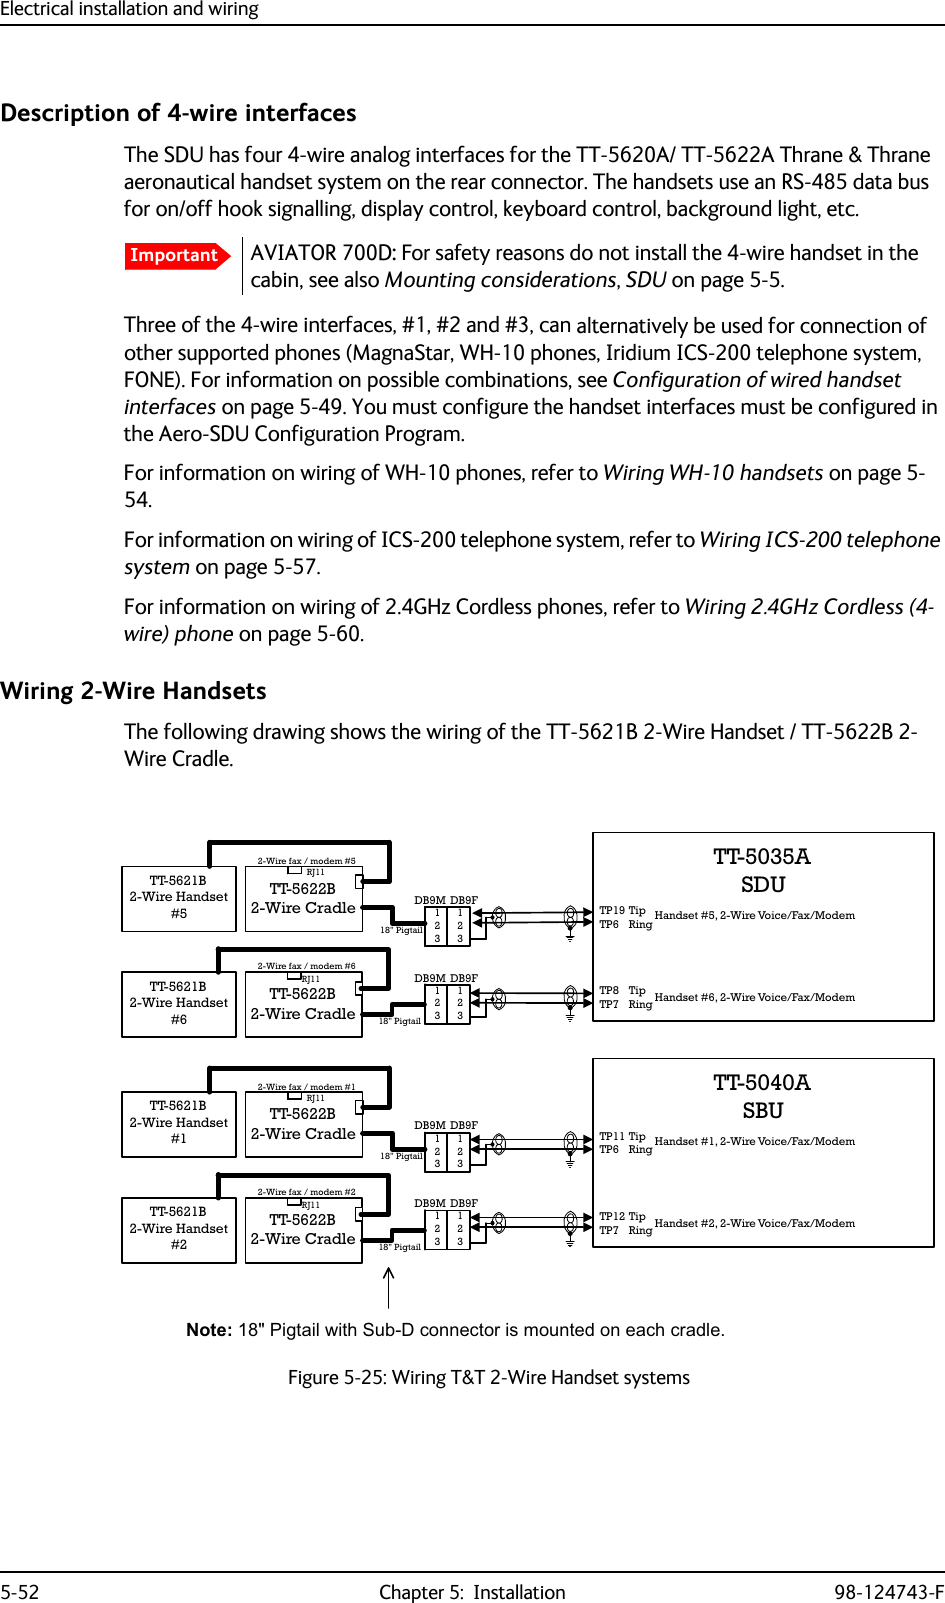 Electrical installation and wiring5-52 Chapter 5:  Installation 98-124743-FDescription of 4-wire interfacesThe SDU has four 4-wire analog interfaces for the TT-5620A/ TT-5622A Thrane &amp; Thrane aeronautical handset system on the rear connector. The handsets use an RS-485 data bus for on/off hook signalling, display control, keyboard control, background light, etc.AVIATOR 700D: For safety reasons do not install the 4-wire handset in the cabin, see also Mounting considerations, SDU on page 5-5. Three of the 4-wire interfaces, #1, #2 and #3, can alternatively be used for connection of other supported phones (MagnaStar, WH-10 phones, Iridium ICS-200 telephone system, FONE). For information on possible combinations, see Configuration of wired handset interfaces on page 5-49. You must configure the handset interfaces must be configured in the Aero-SDU Configuration Program.For information on wiring of WH-10 phones, refer to Wiring WH-10 handsets on page 5-54.For information on wiring of ICS-200 telephone system, refer to Wiring ICS-200 telephone system on page 5-57.For information on wiring of 2.4GHz Cordless phones, refer to Wiring 2.4GHz Cordless (4-wire) phone on page 5-60.Wiring 2-Wire HandsetsThe following drawing shows the wiring of the TT-5621B 2-Wire Handset / TT-5622B 2-Wire Cradle.ImportantFigure 5-25: Wiring T&amp;T 2-Wire Handset systems77$6&apos;877%:LUH&amp;UDGOH77%:LUH&amp;UDGOH :LUHID[PRGHP:LUHID[PRGHP&apos;%)&apos;%0&apos;%0 &apos;%)77%:LUH+DQGVHW77%:LUH+DQGVHW73737LS5LQJ +DQGVHW:LUH9RLFH)D[0RGHP73737LS5LQJ +DQGVHW:LUH9RLFH)D[0RGHP5-5-3LJWDLO3LJWDLO1RWH3LJWDLOZLWK6XE&apos;FRQQHFWRULVPRXQWHGRQHDFKFUDGOH77$6%877%:LUH&amp;UDGOH77%:LUH&amp;UDGOH :LUHID[PRGHP:LUHID[PRGHP&apos;%)&apos;%0&apos;%0 &apos;%)77%:LUH+DQGVHW77%:LUH+DQGVHW73737LS5LQJ +DQGVHW:LUH9RLFH)D[0RGHP73737LS5LQJ +DQGVHW:LUH9RLFH)D[0RGHP5-5-3LJWDLO3LJWDLO